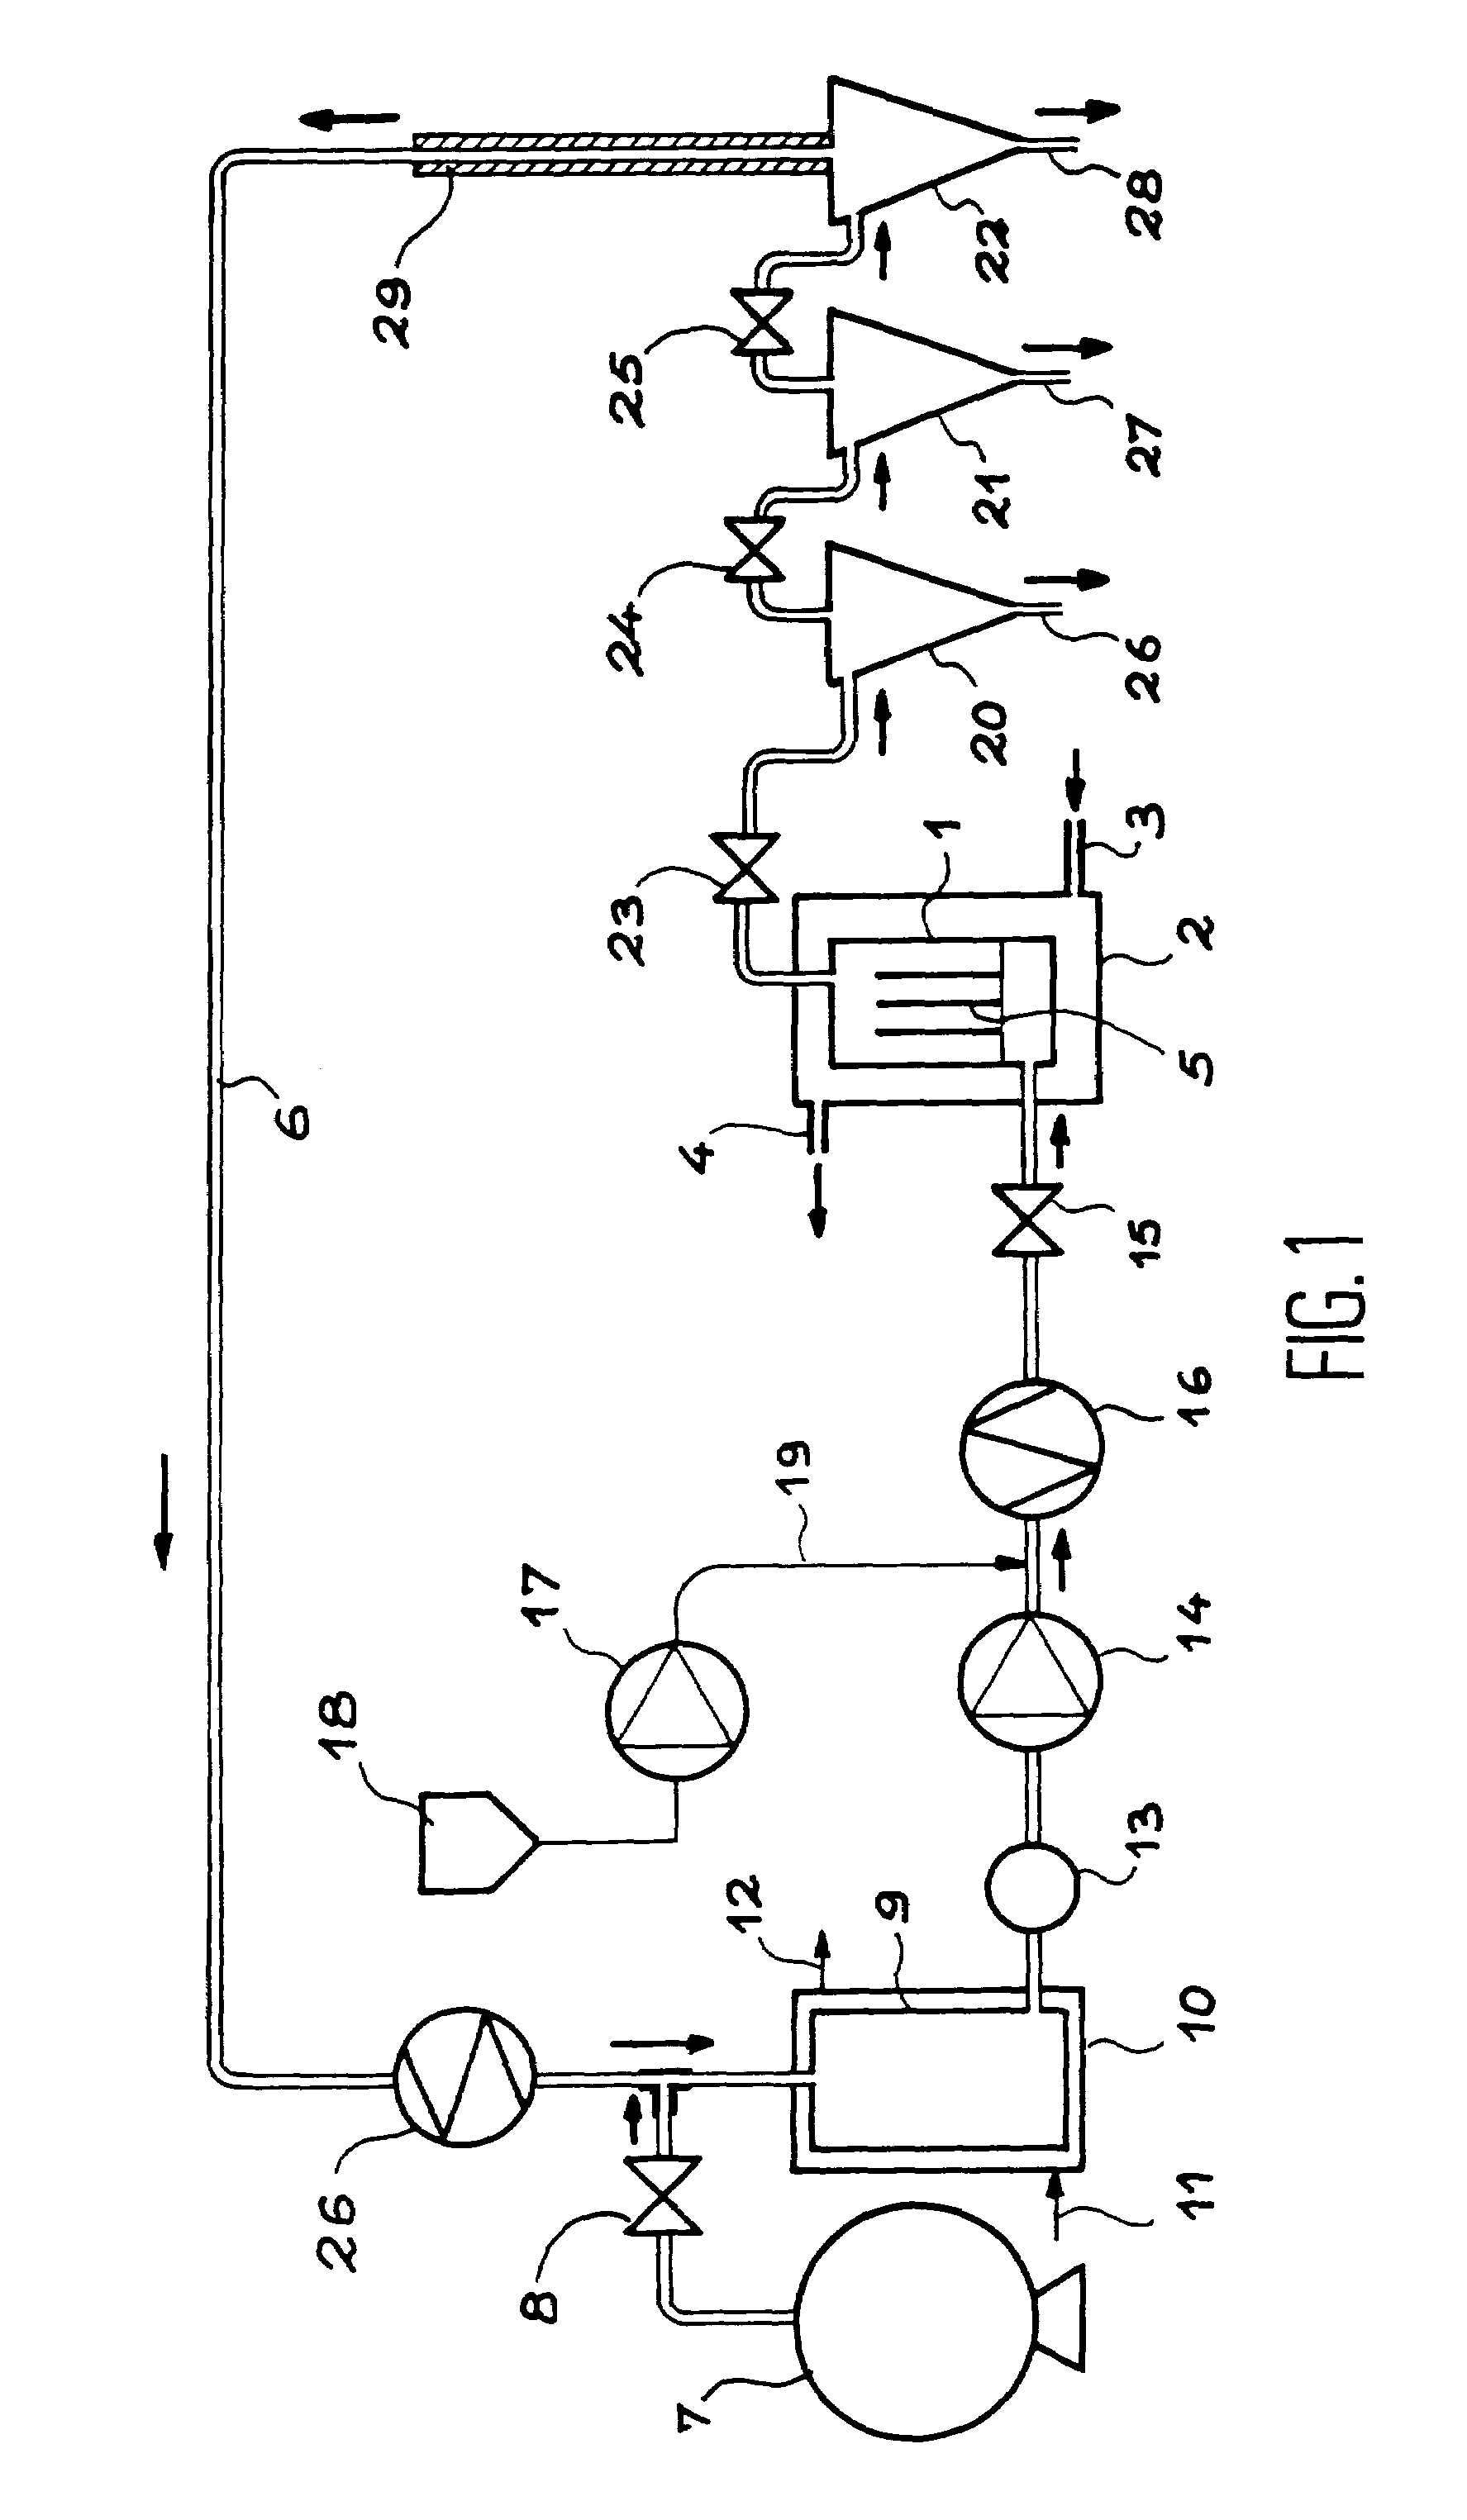 Method for treating and extracting cork organic compounds, with a dense fluid under pressure